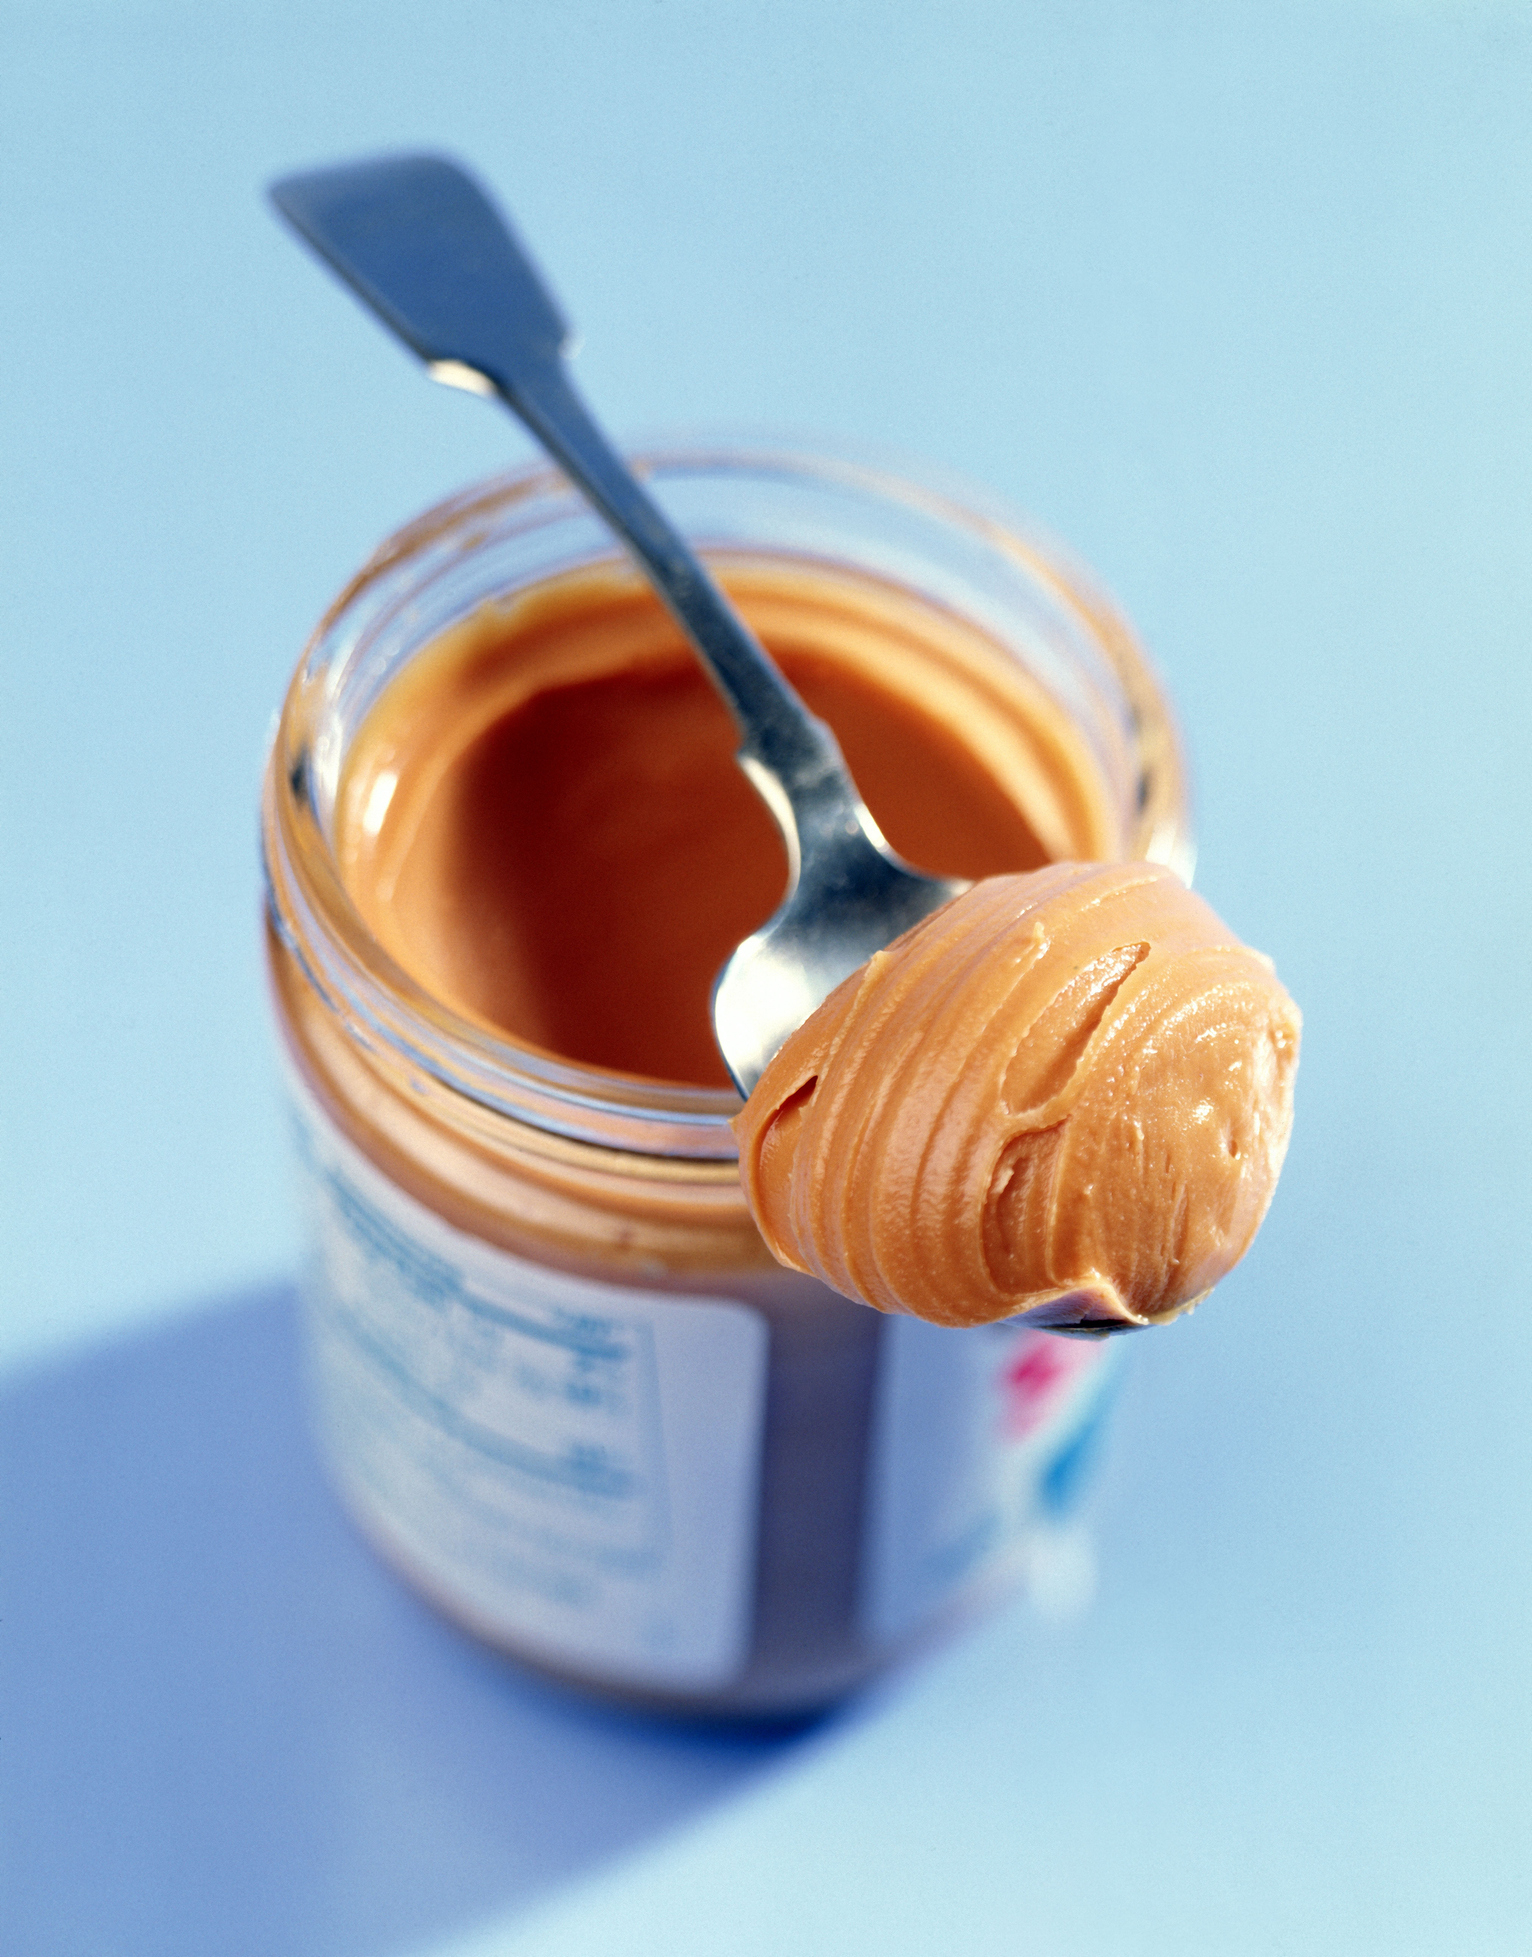 Jar of peanut butter with spoon inside, used for article on aphrodisiac foods